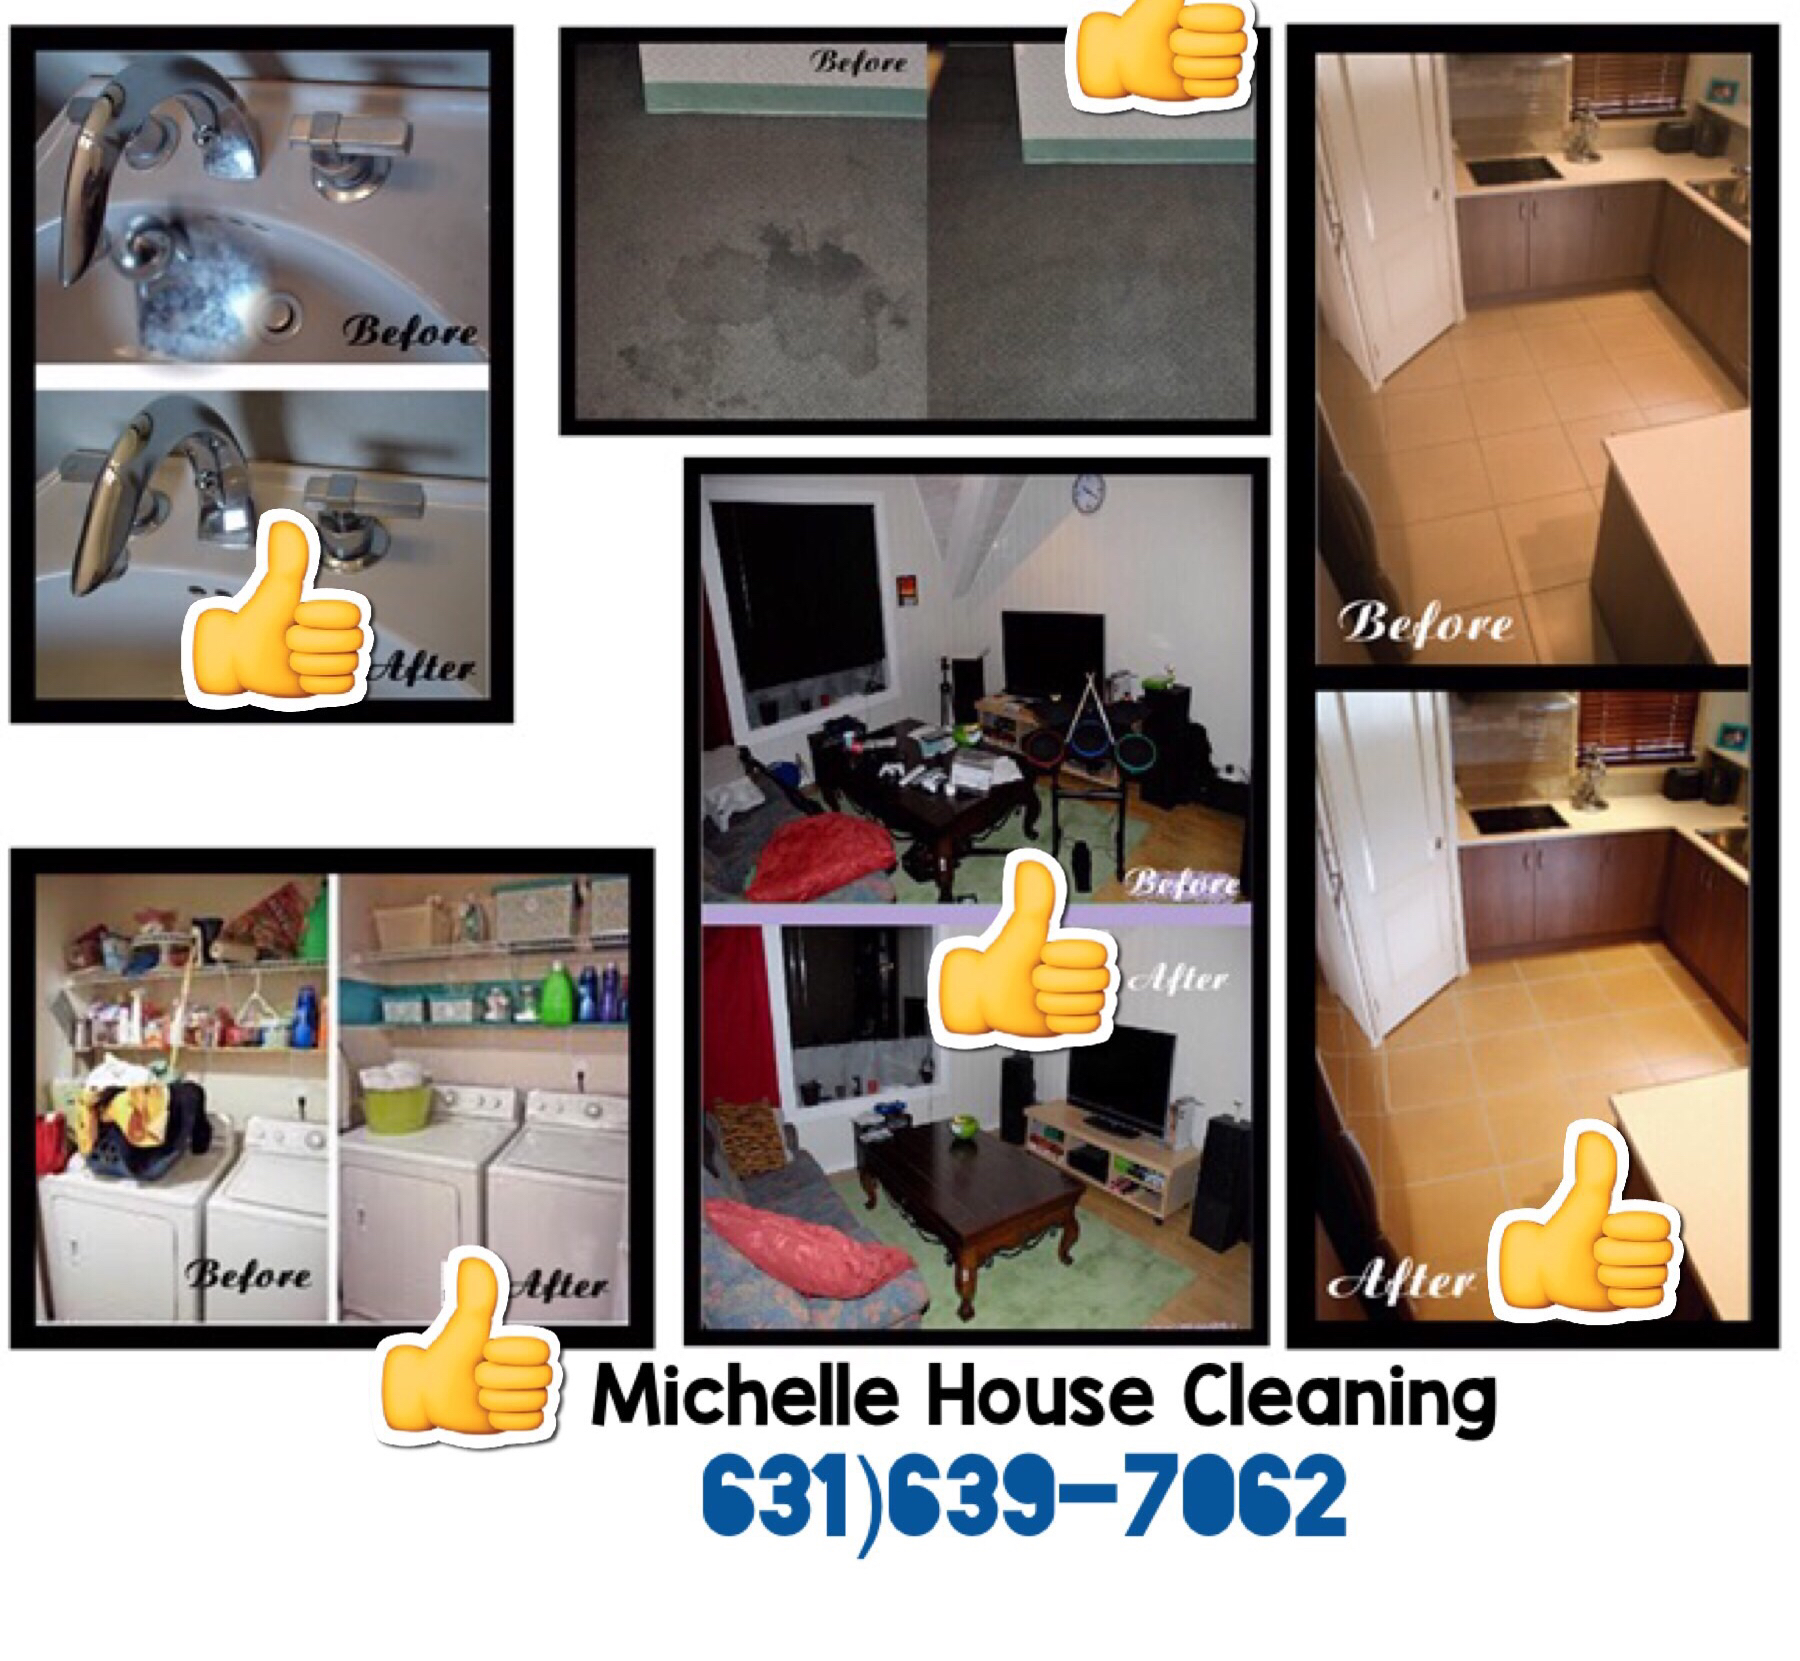 Michelle House Cleaning Service Photo